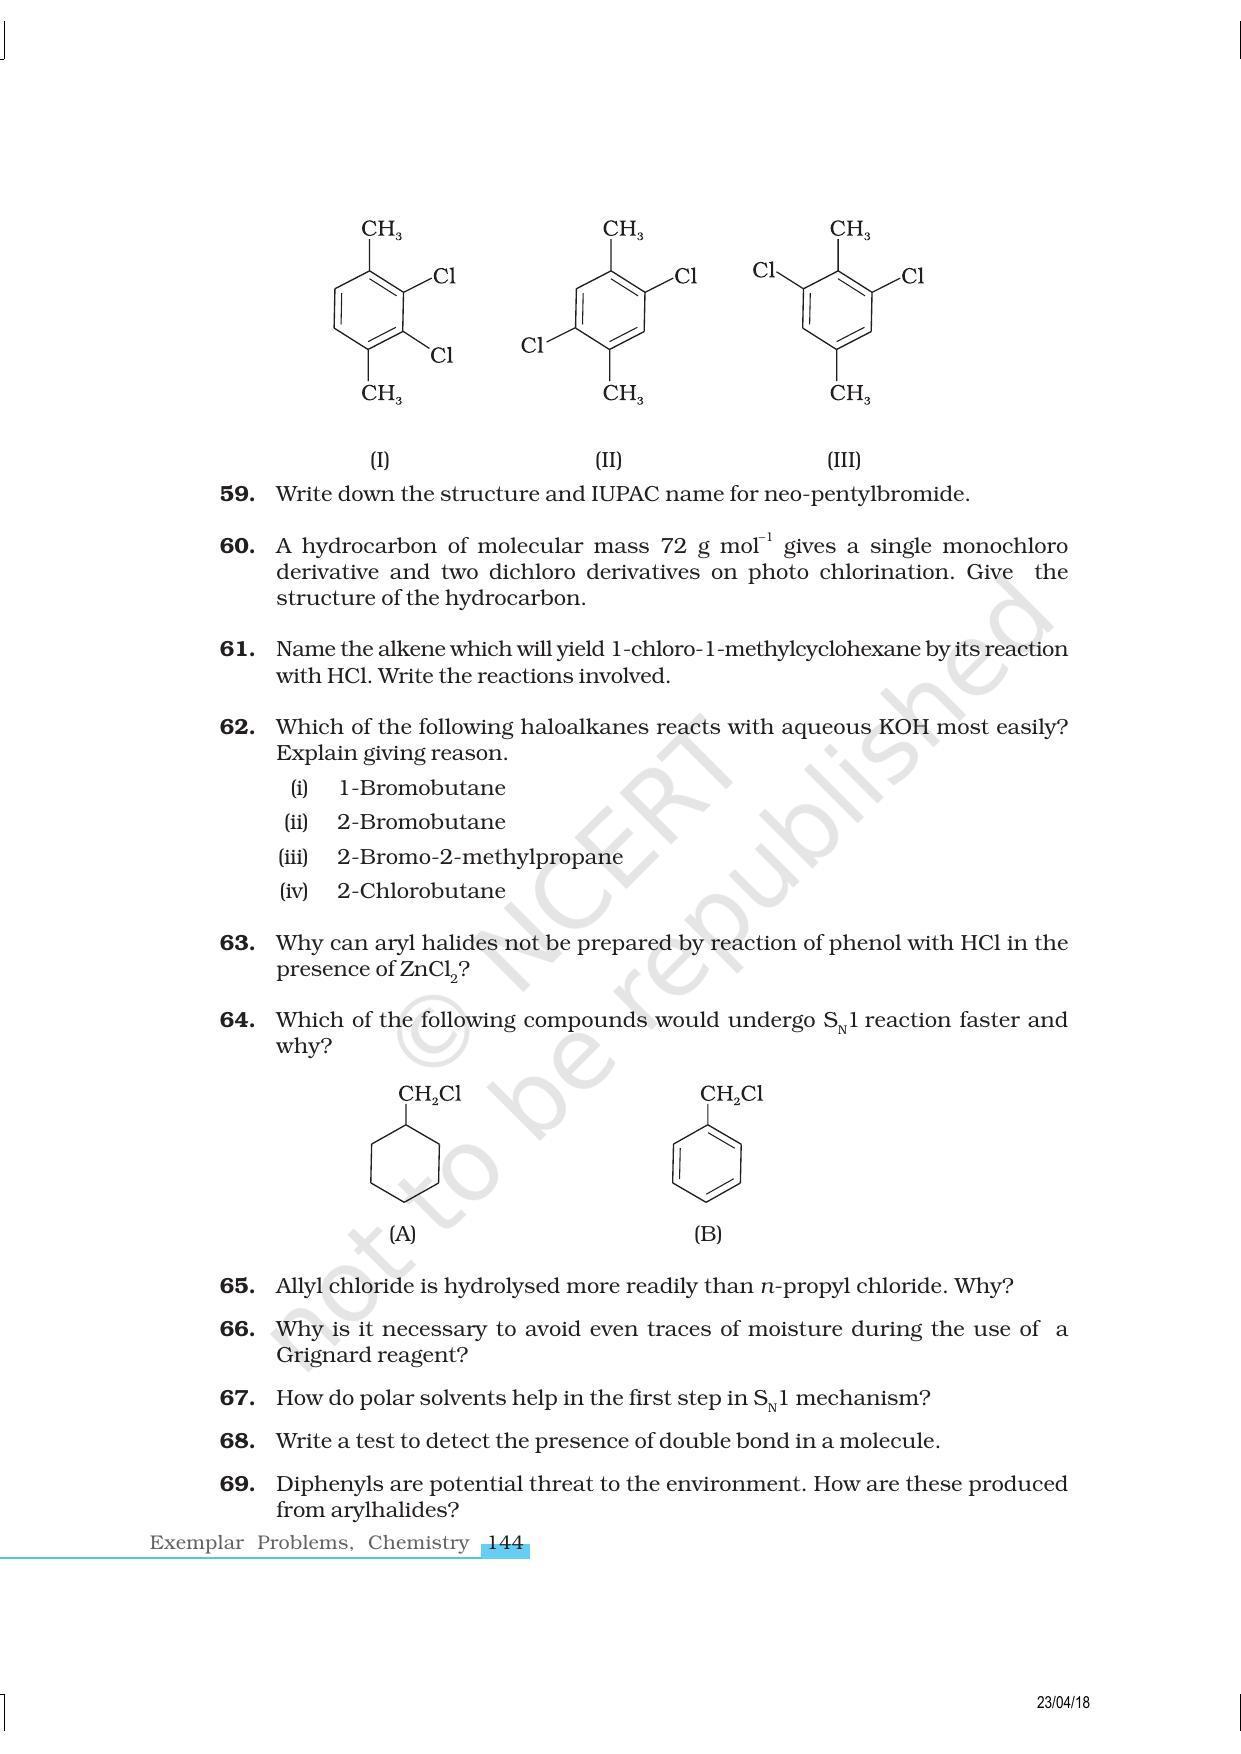 NCERT Exemplar Book for Class 12 Chemistry: Chapter 10 Haloalkanes and Haloarenes - Page 12